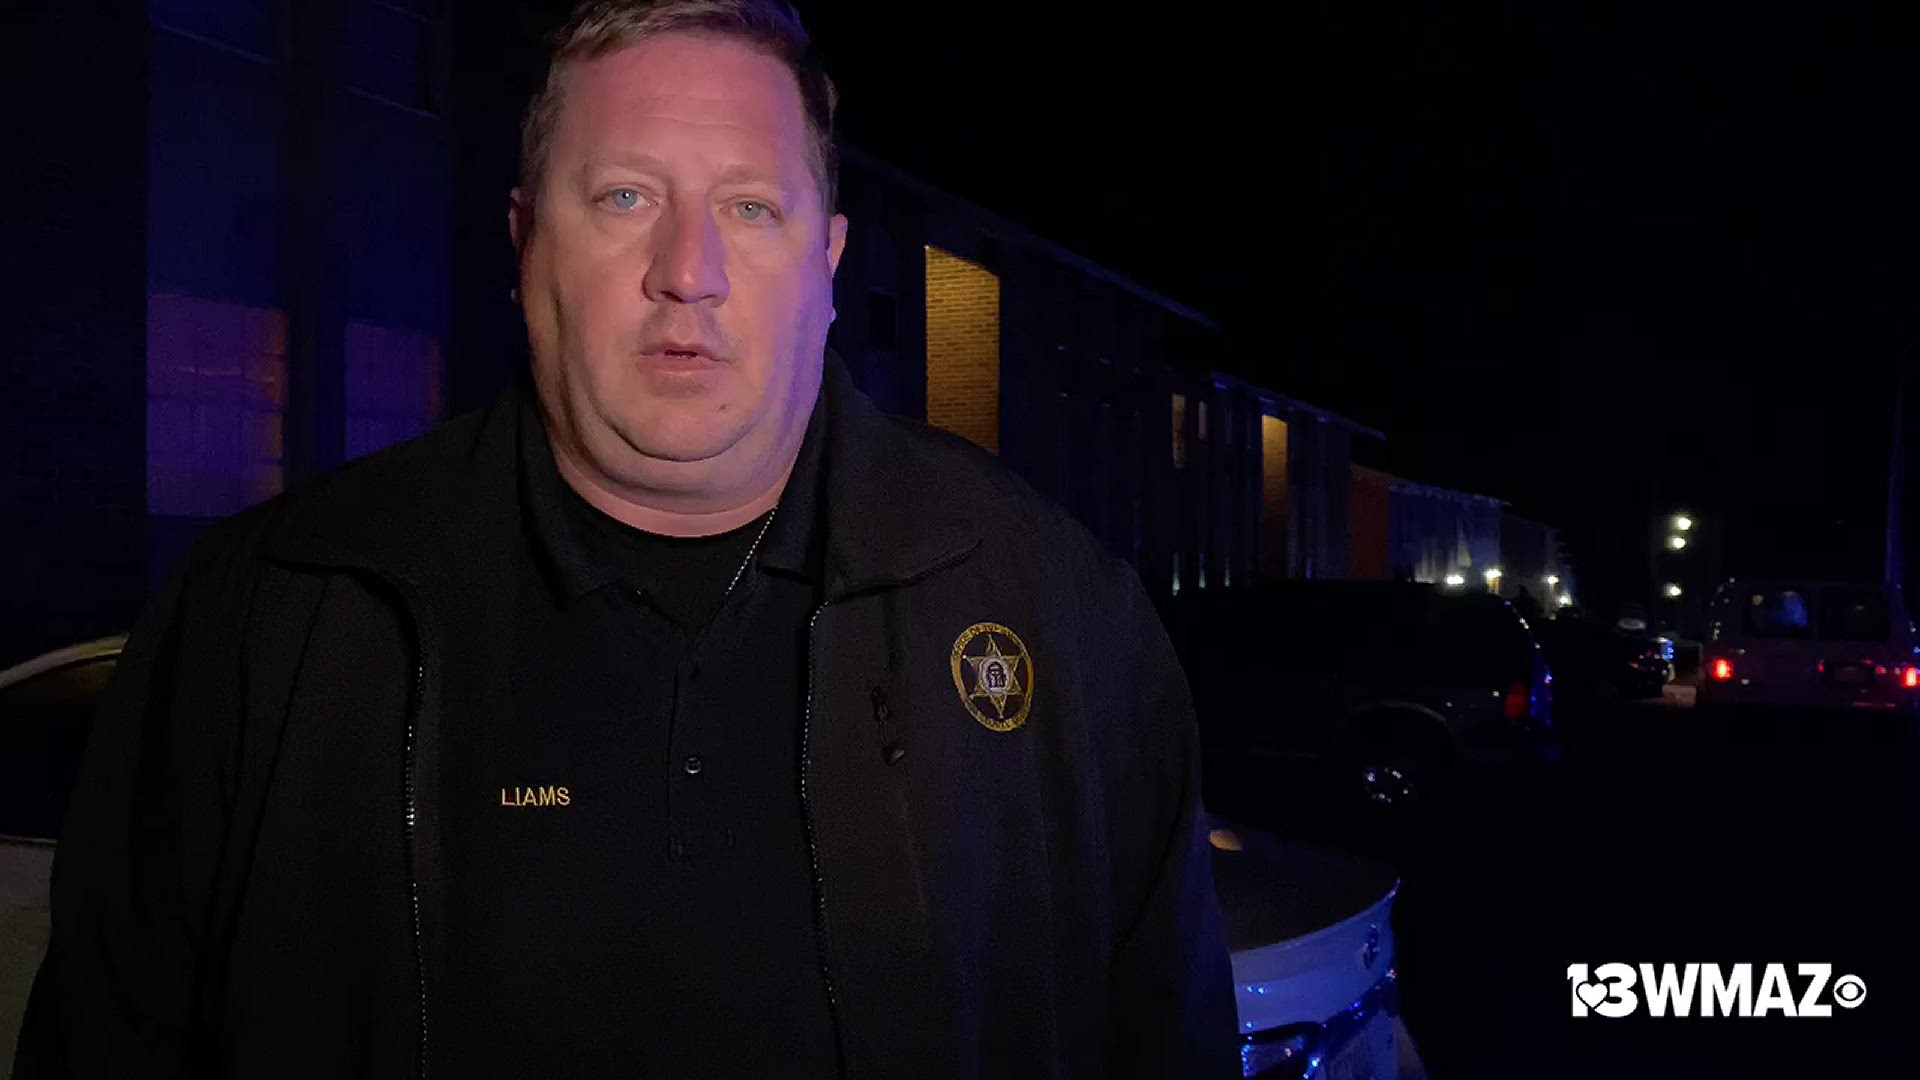 According to Sgt. Clay Williams with the Bibb County Sheriff's Office, at around 10 p.m., deputies got the call about a man shot at the apartment complex.